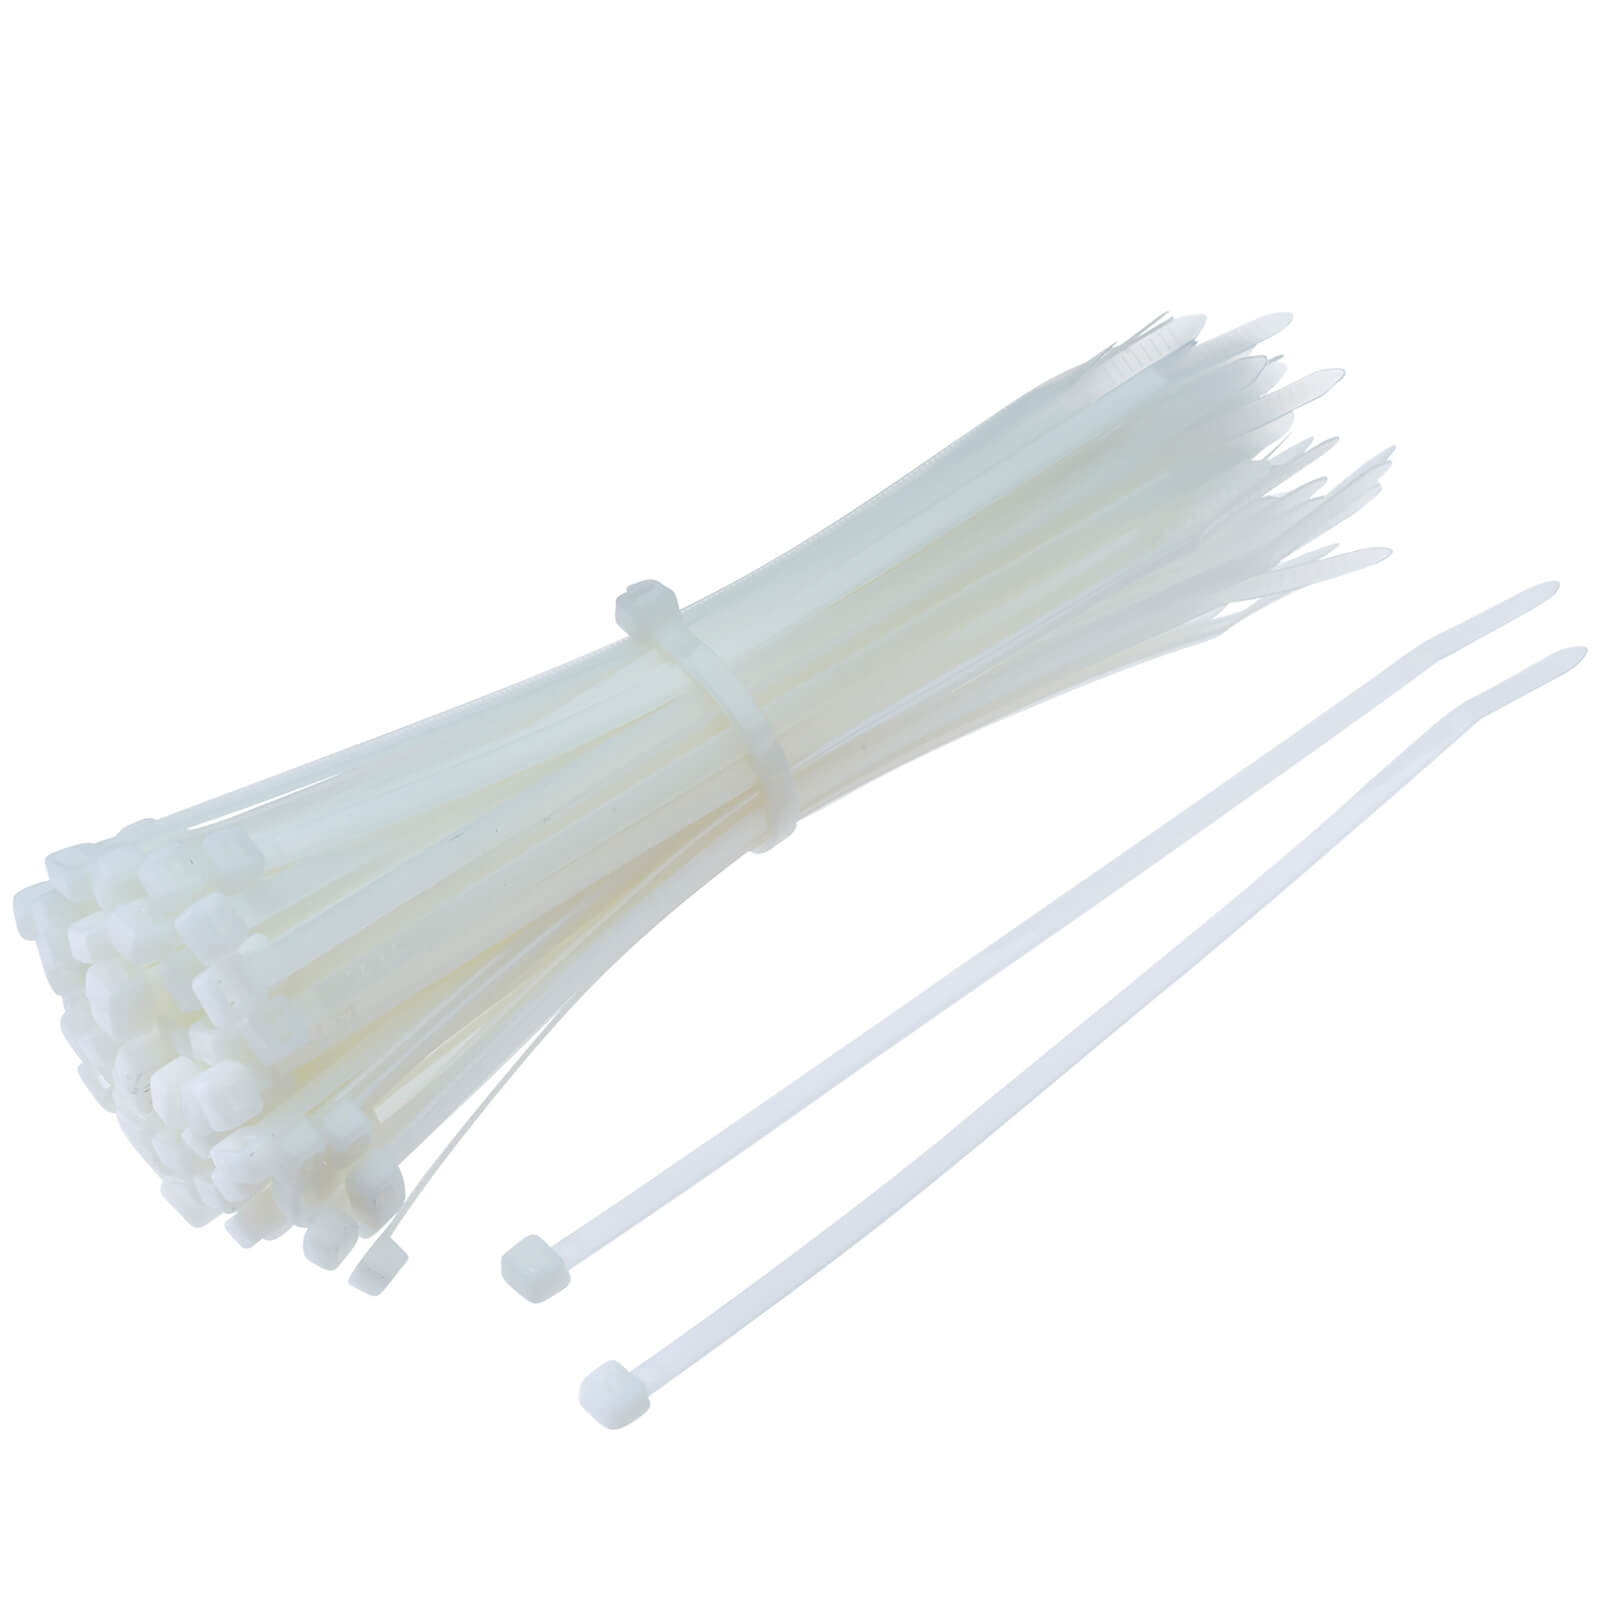 Masterplug Cable Ties 200 x 2.5mm Neutral 100 Pack